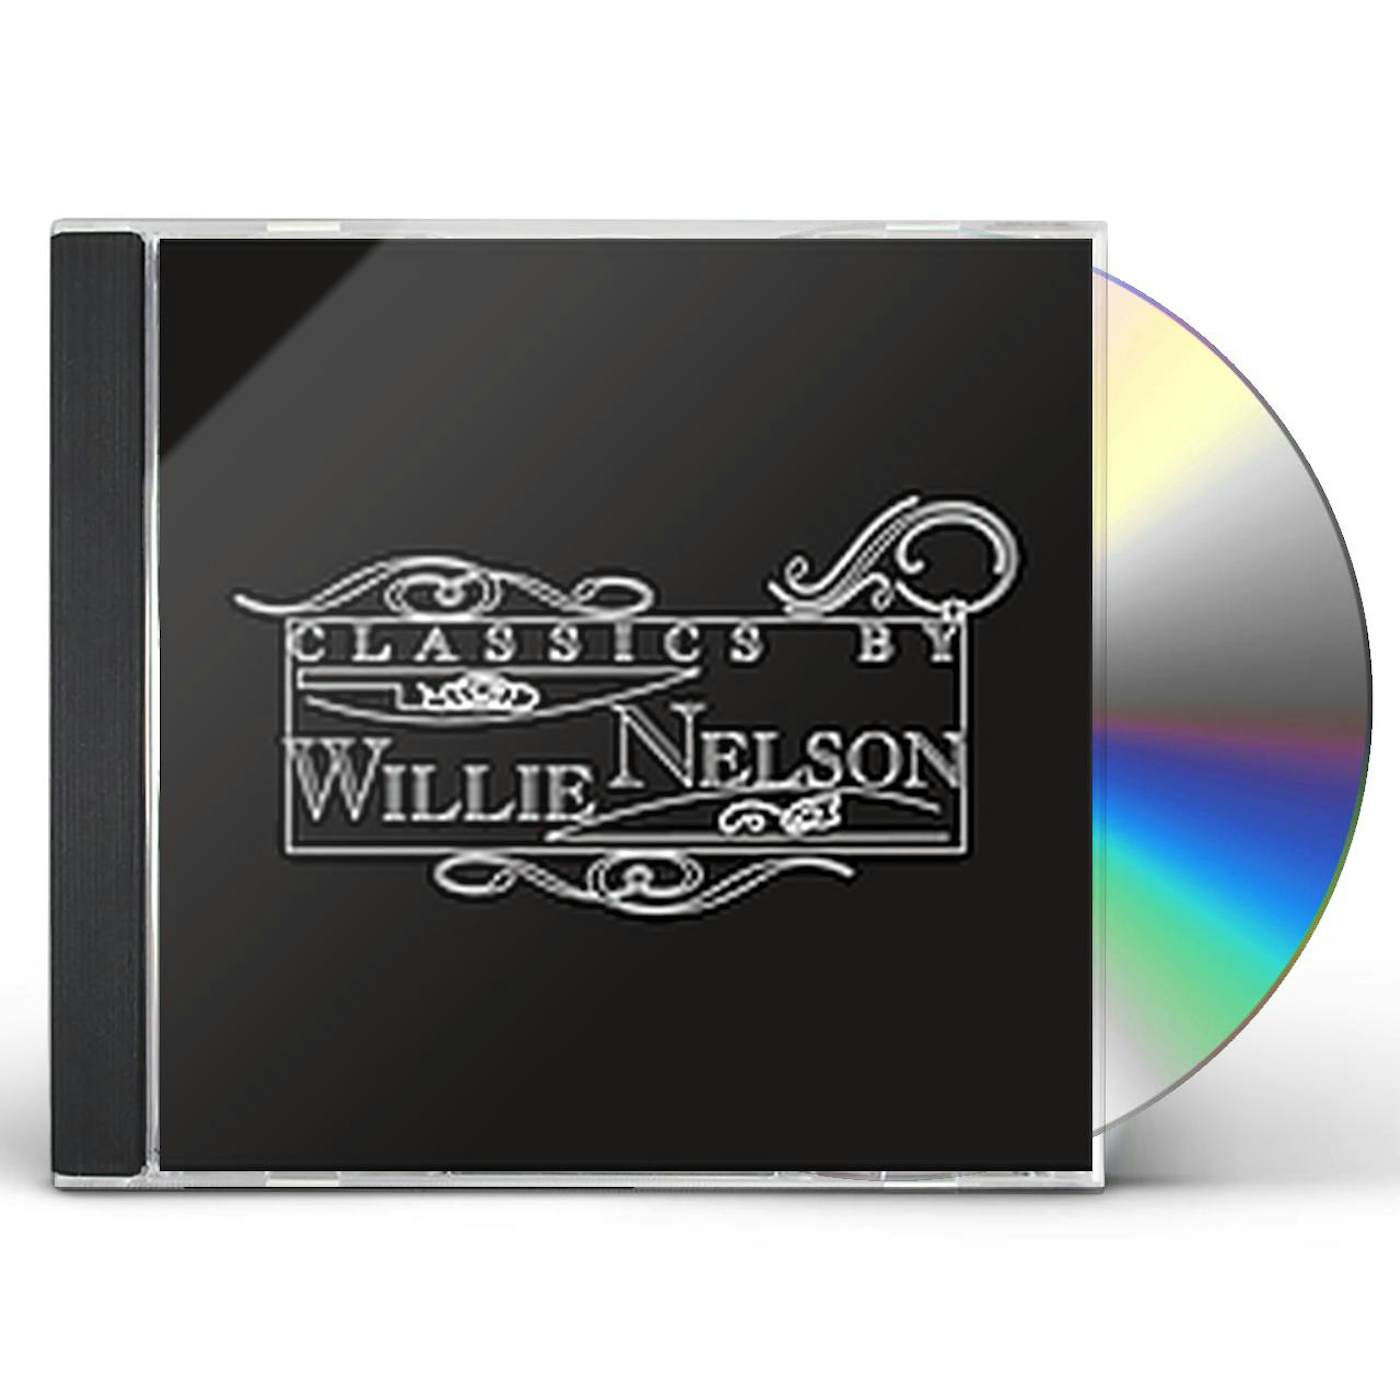 CLASSICS BY WILLIE NELSON CD